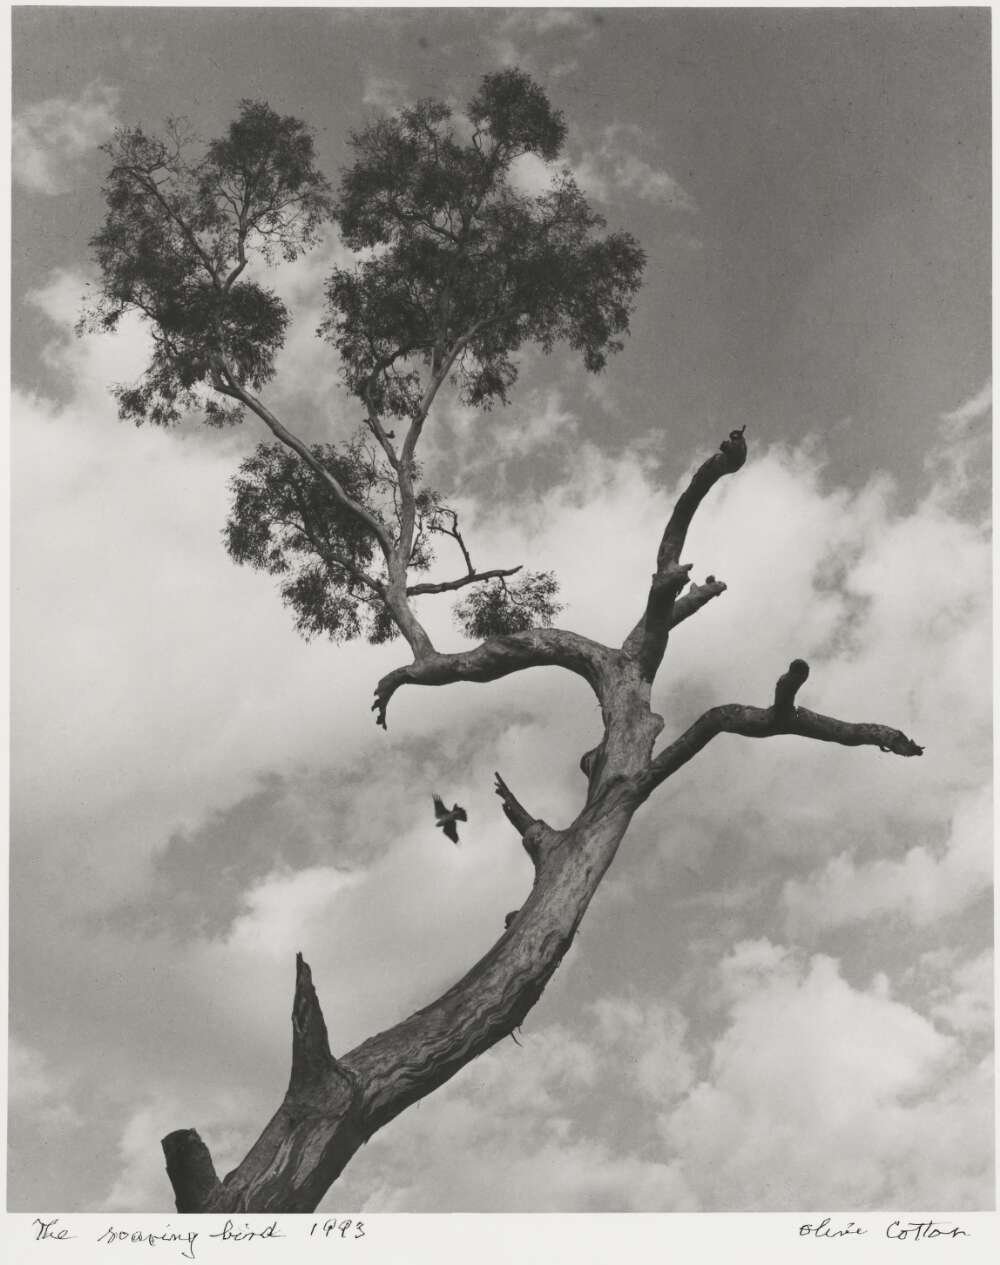 A large tree, barred from leaves until the very top, a small bird soaring away from the tree. Black and white, angled to be looking up to the tree.